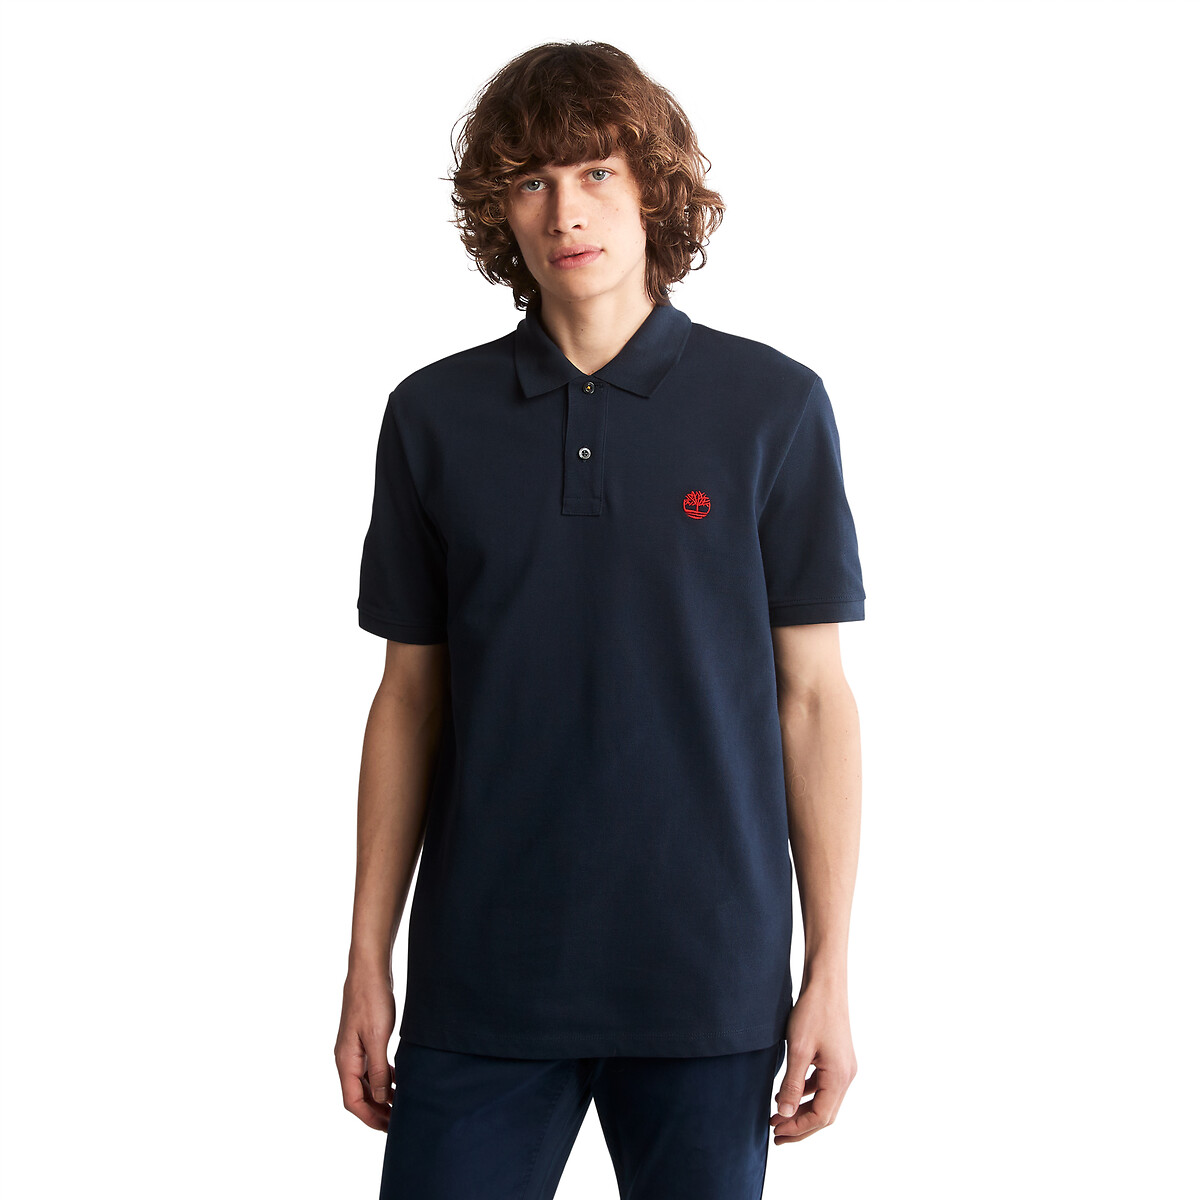 Millers River Polo Shirt in Cotton Pique and Regular Fit